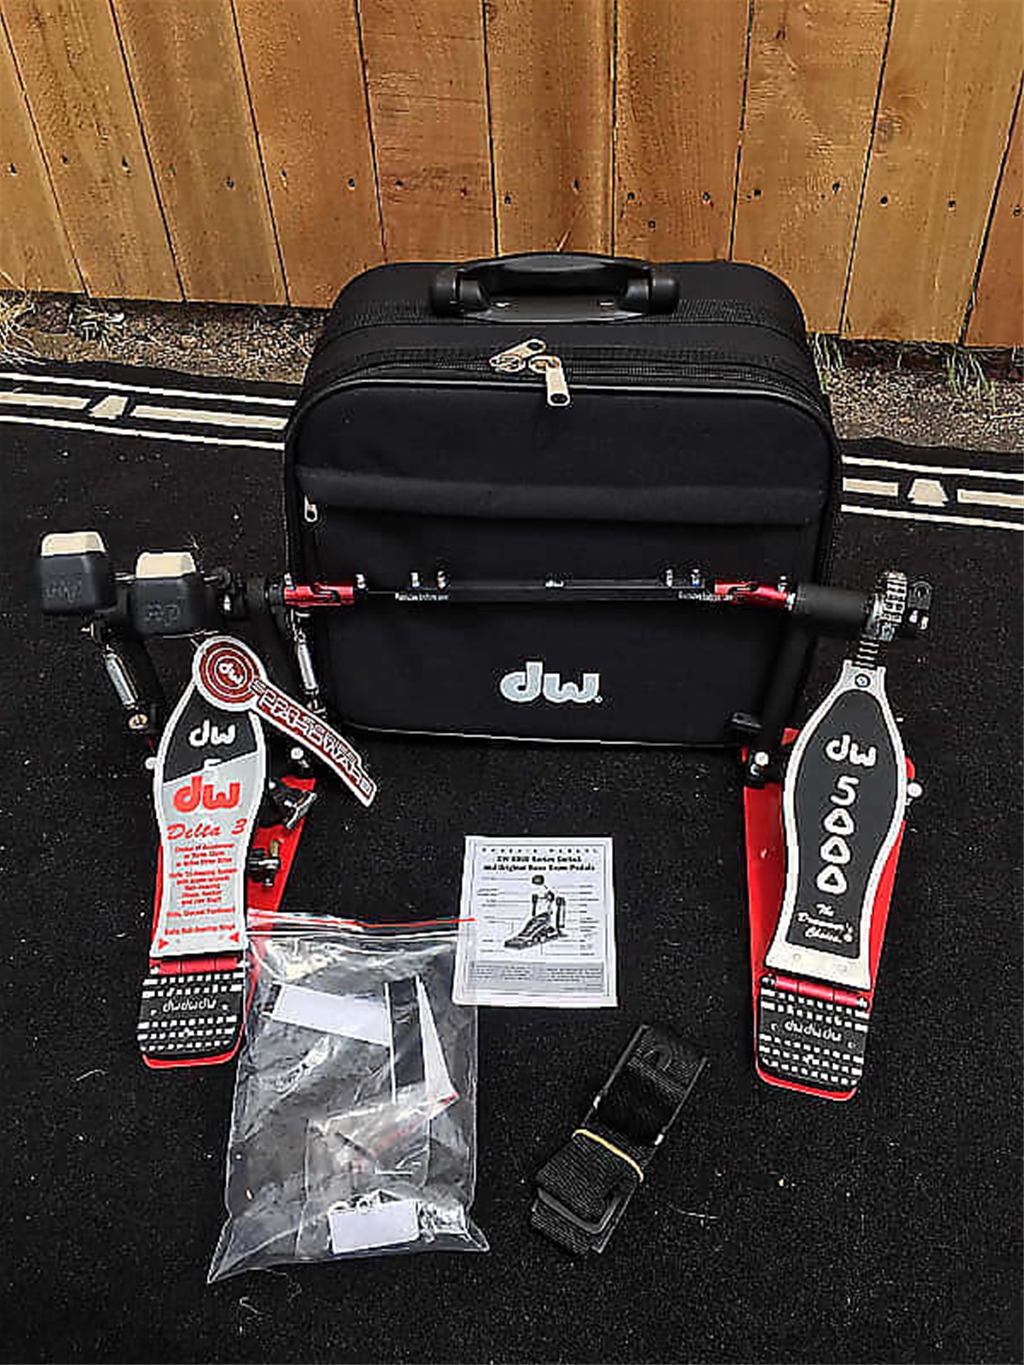 DW 5000 Series Delta III Turbo DWCP5002TDL3 Double Bass-Drum Pedal w/ Bag - LEFTY 